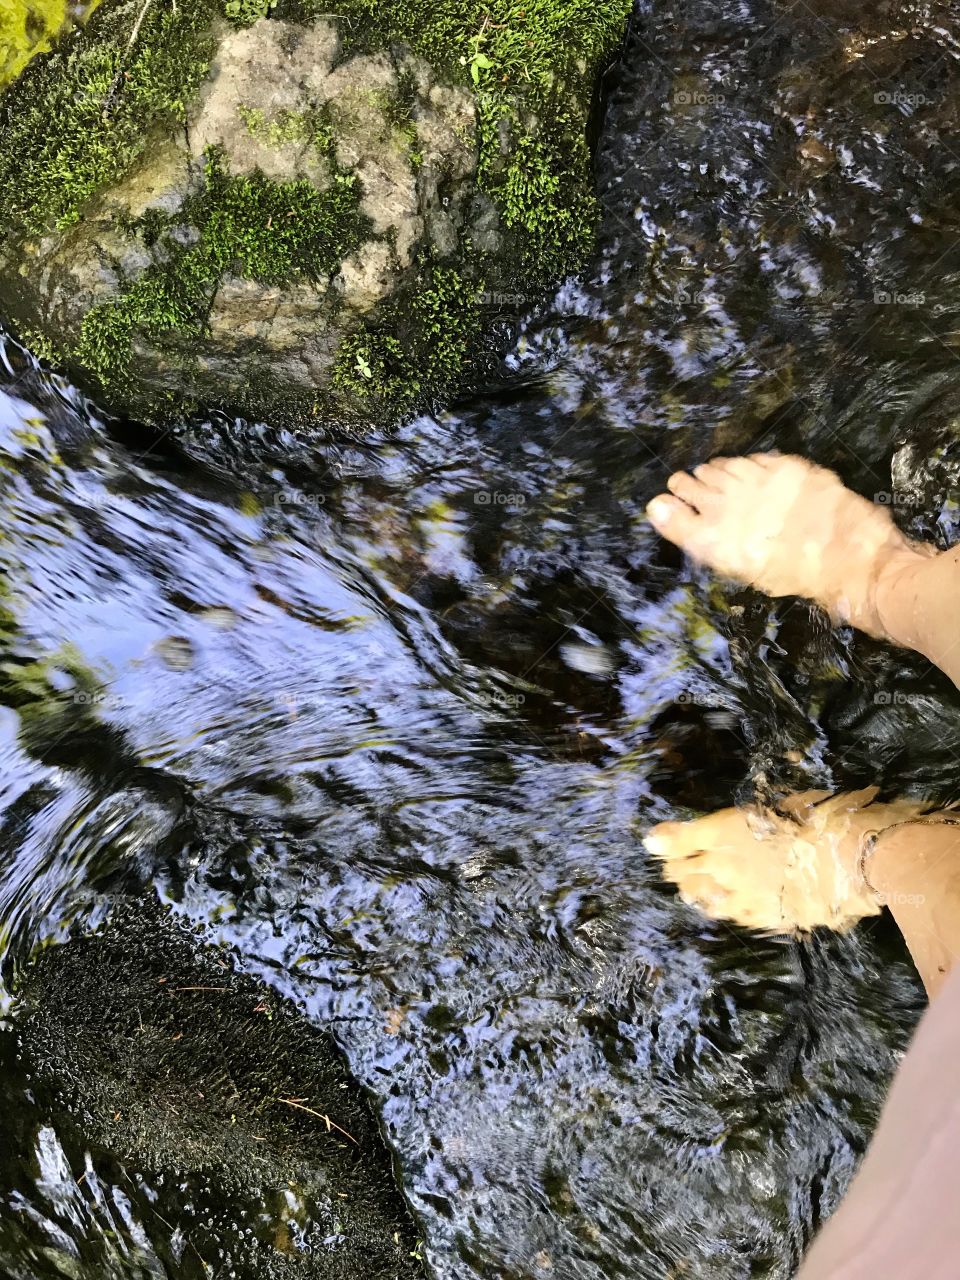 Cooling my feet in Jimmy Brook